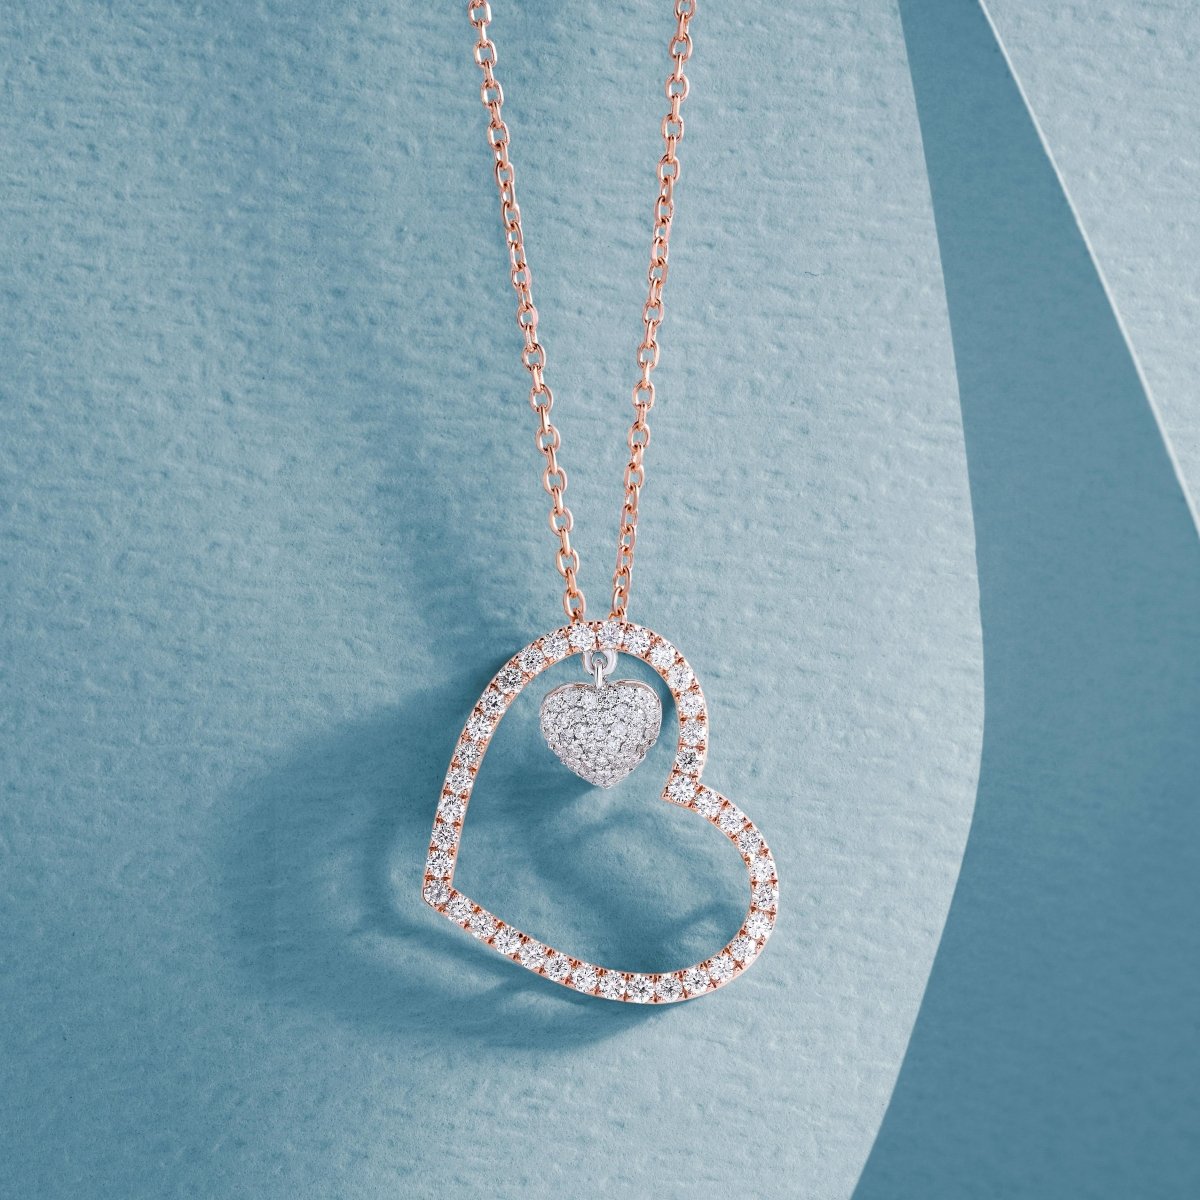 Falling in Love with Heart-Shaped Jewellery - Lustre Of London